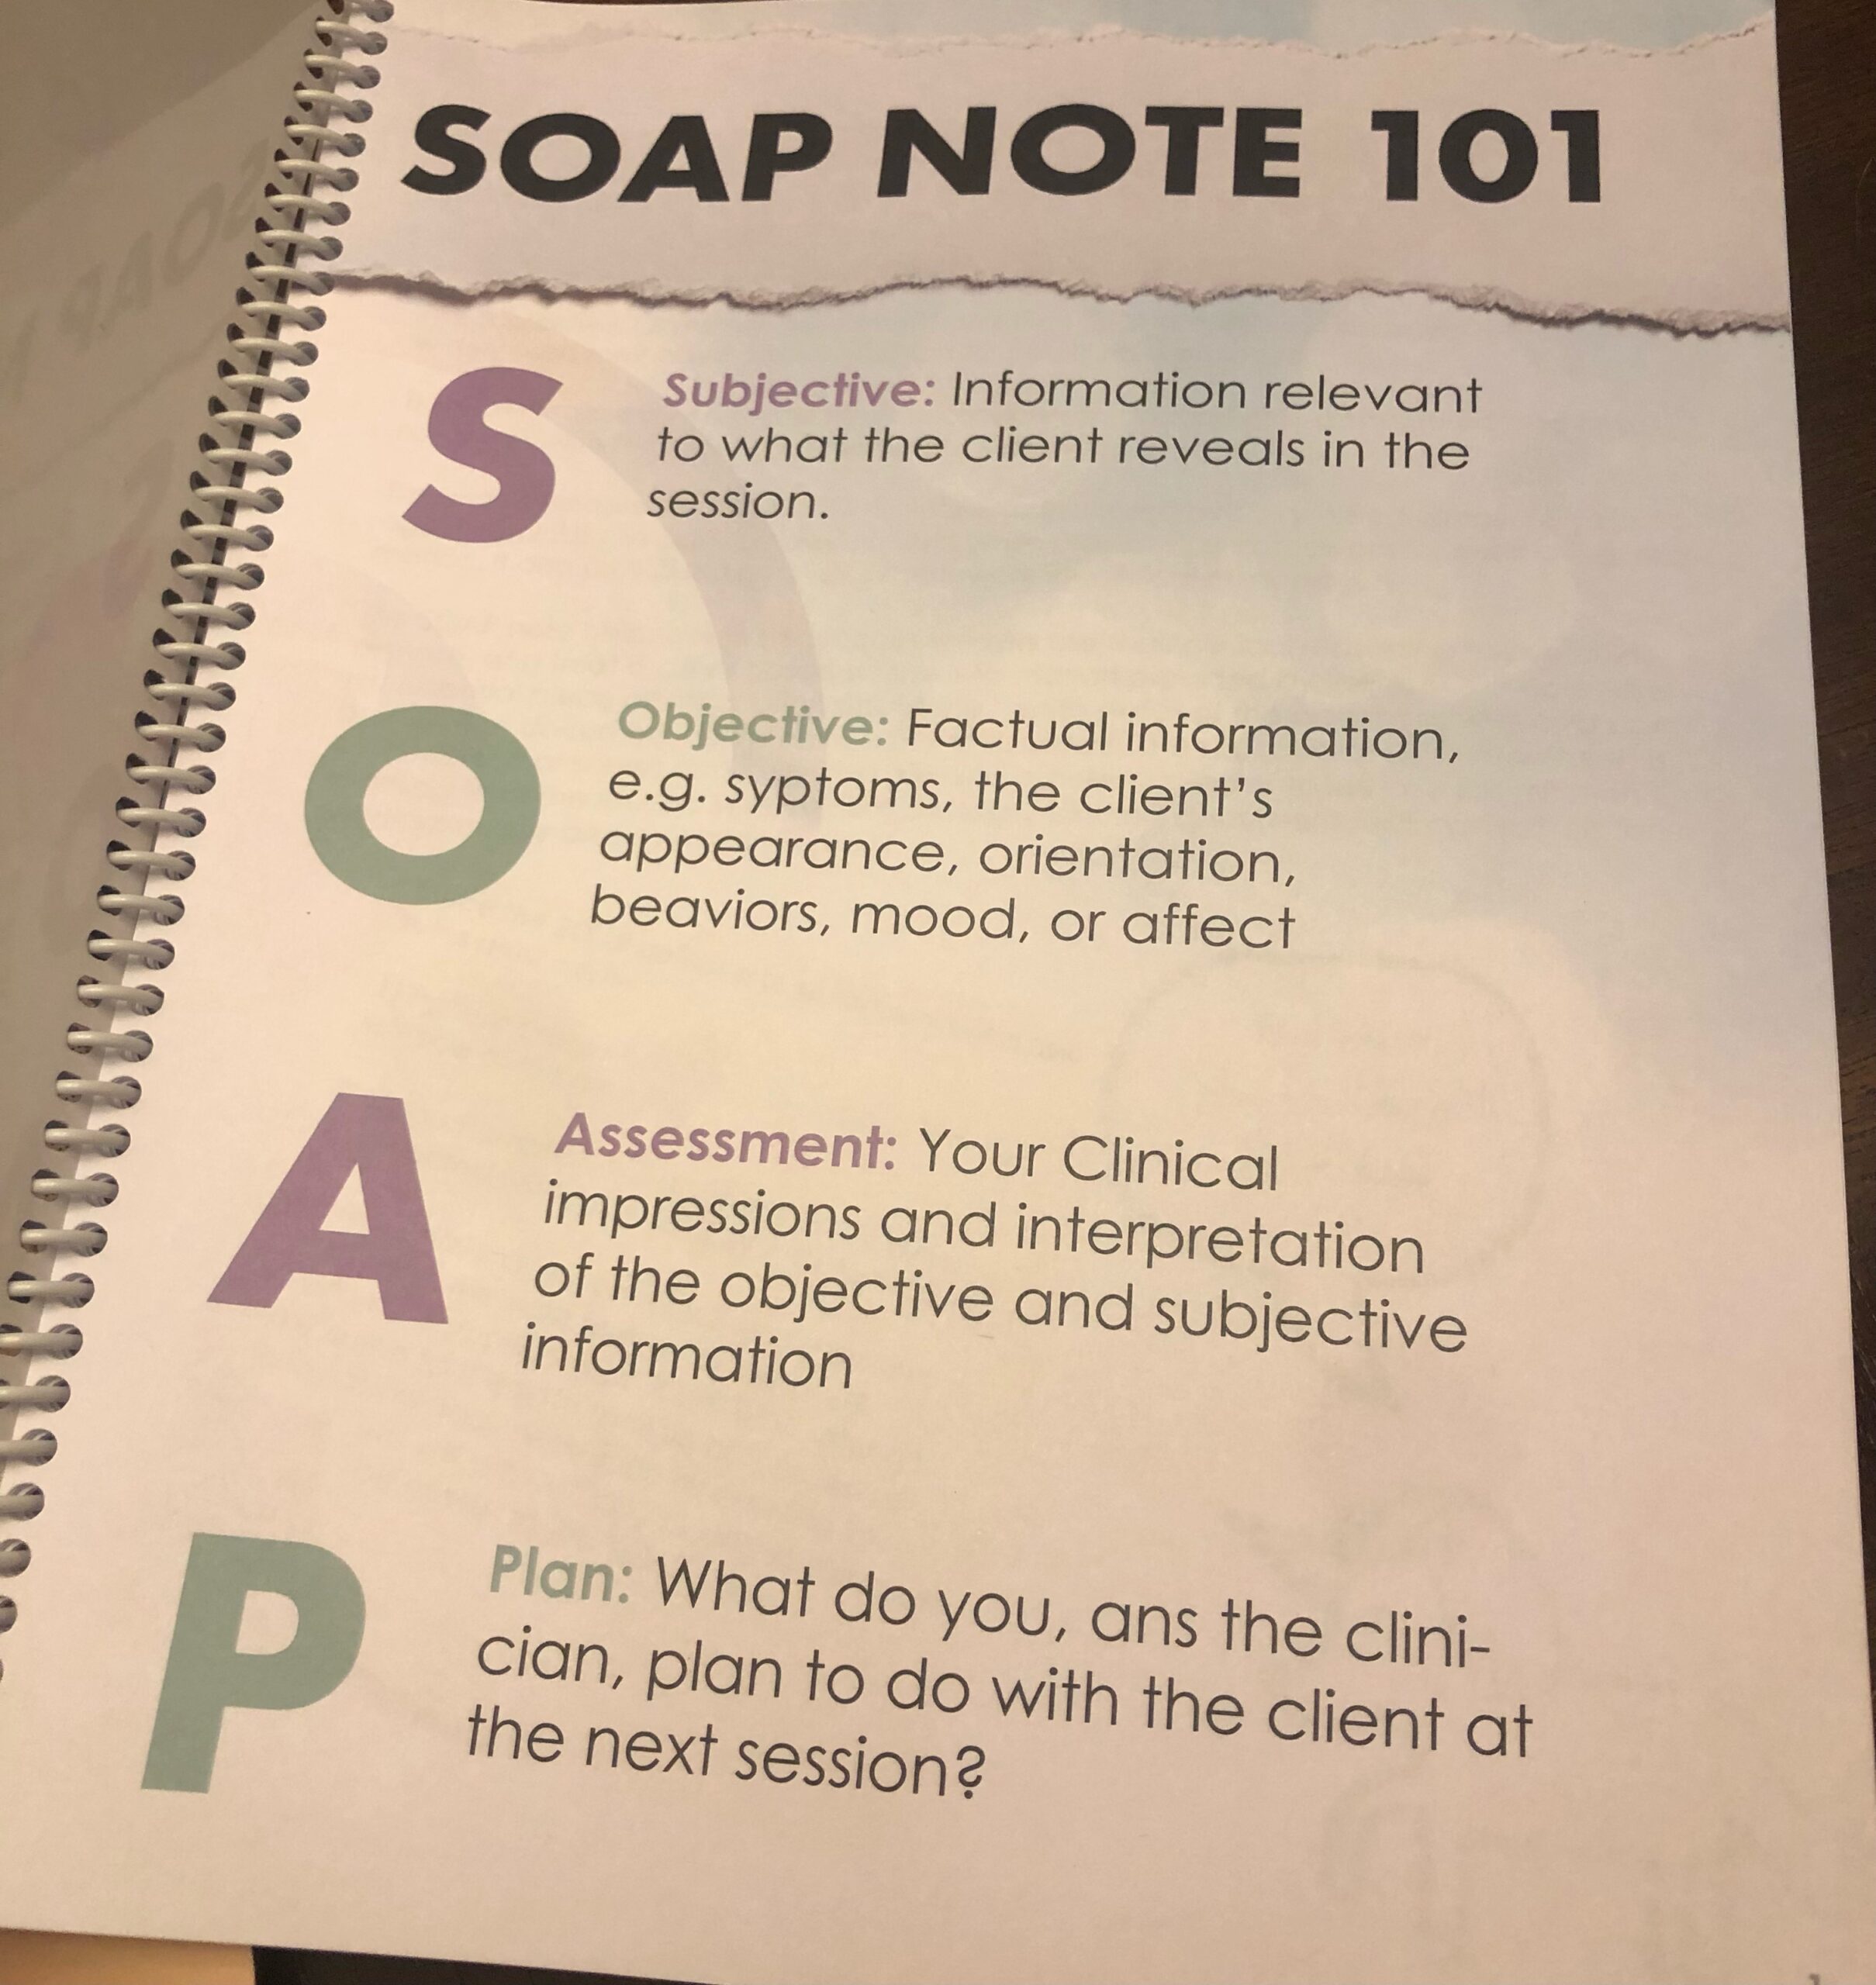 THE CSL THERAPY SOAP NOTEBOOK – Taime Out Sculpting Institute